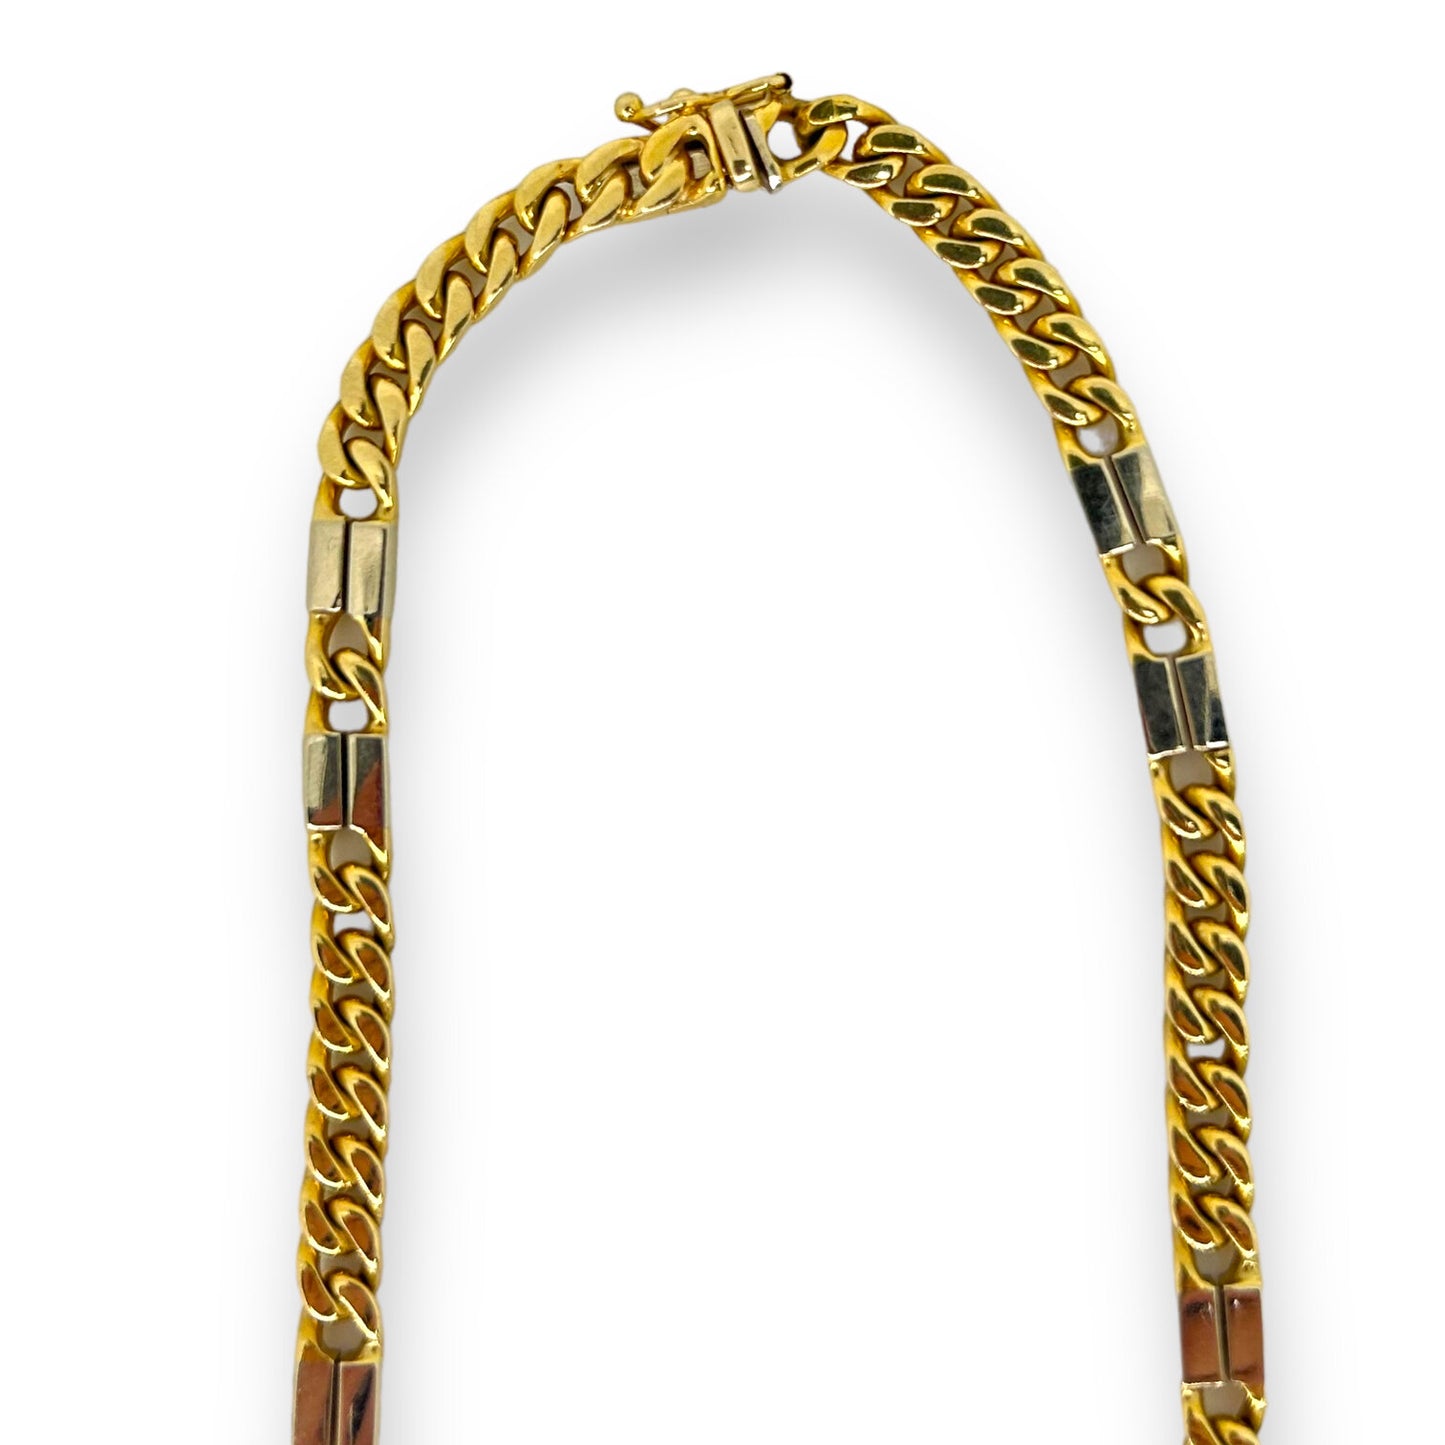 VINTAGE 14K TWO-TONED CURB LINK CHAIN w/ DOUBLE BAR LINKS